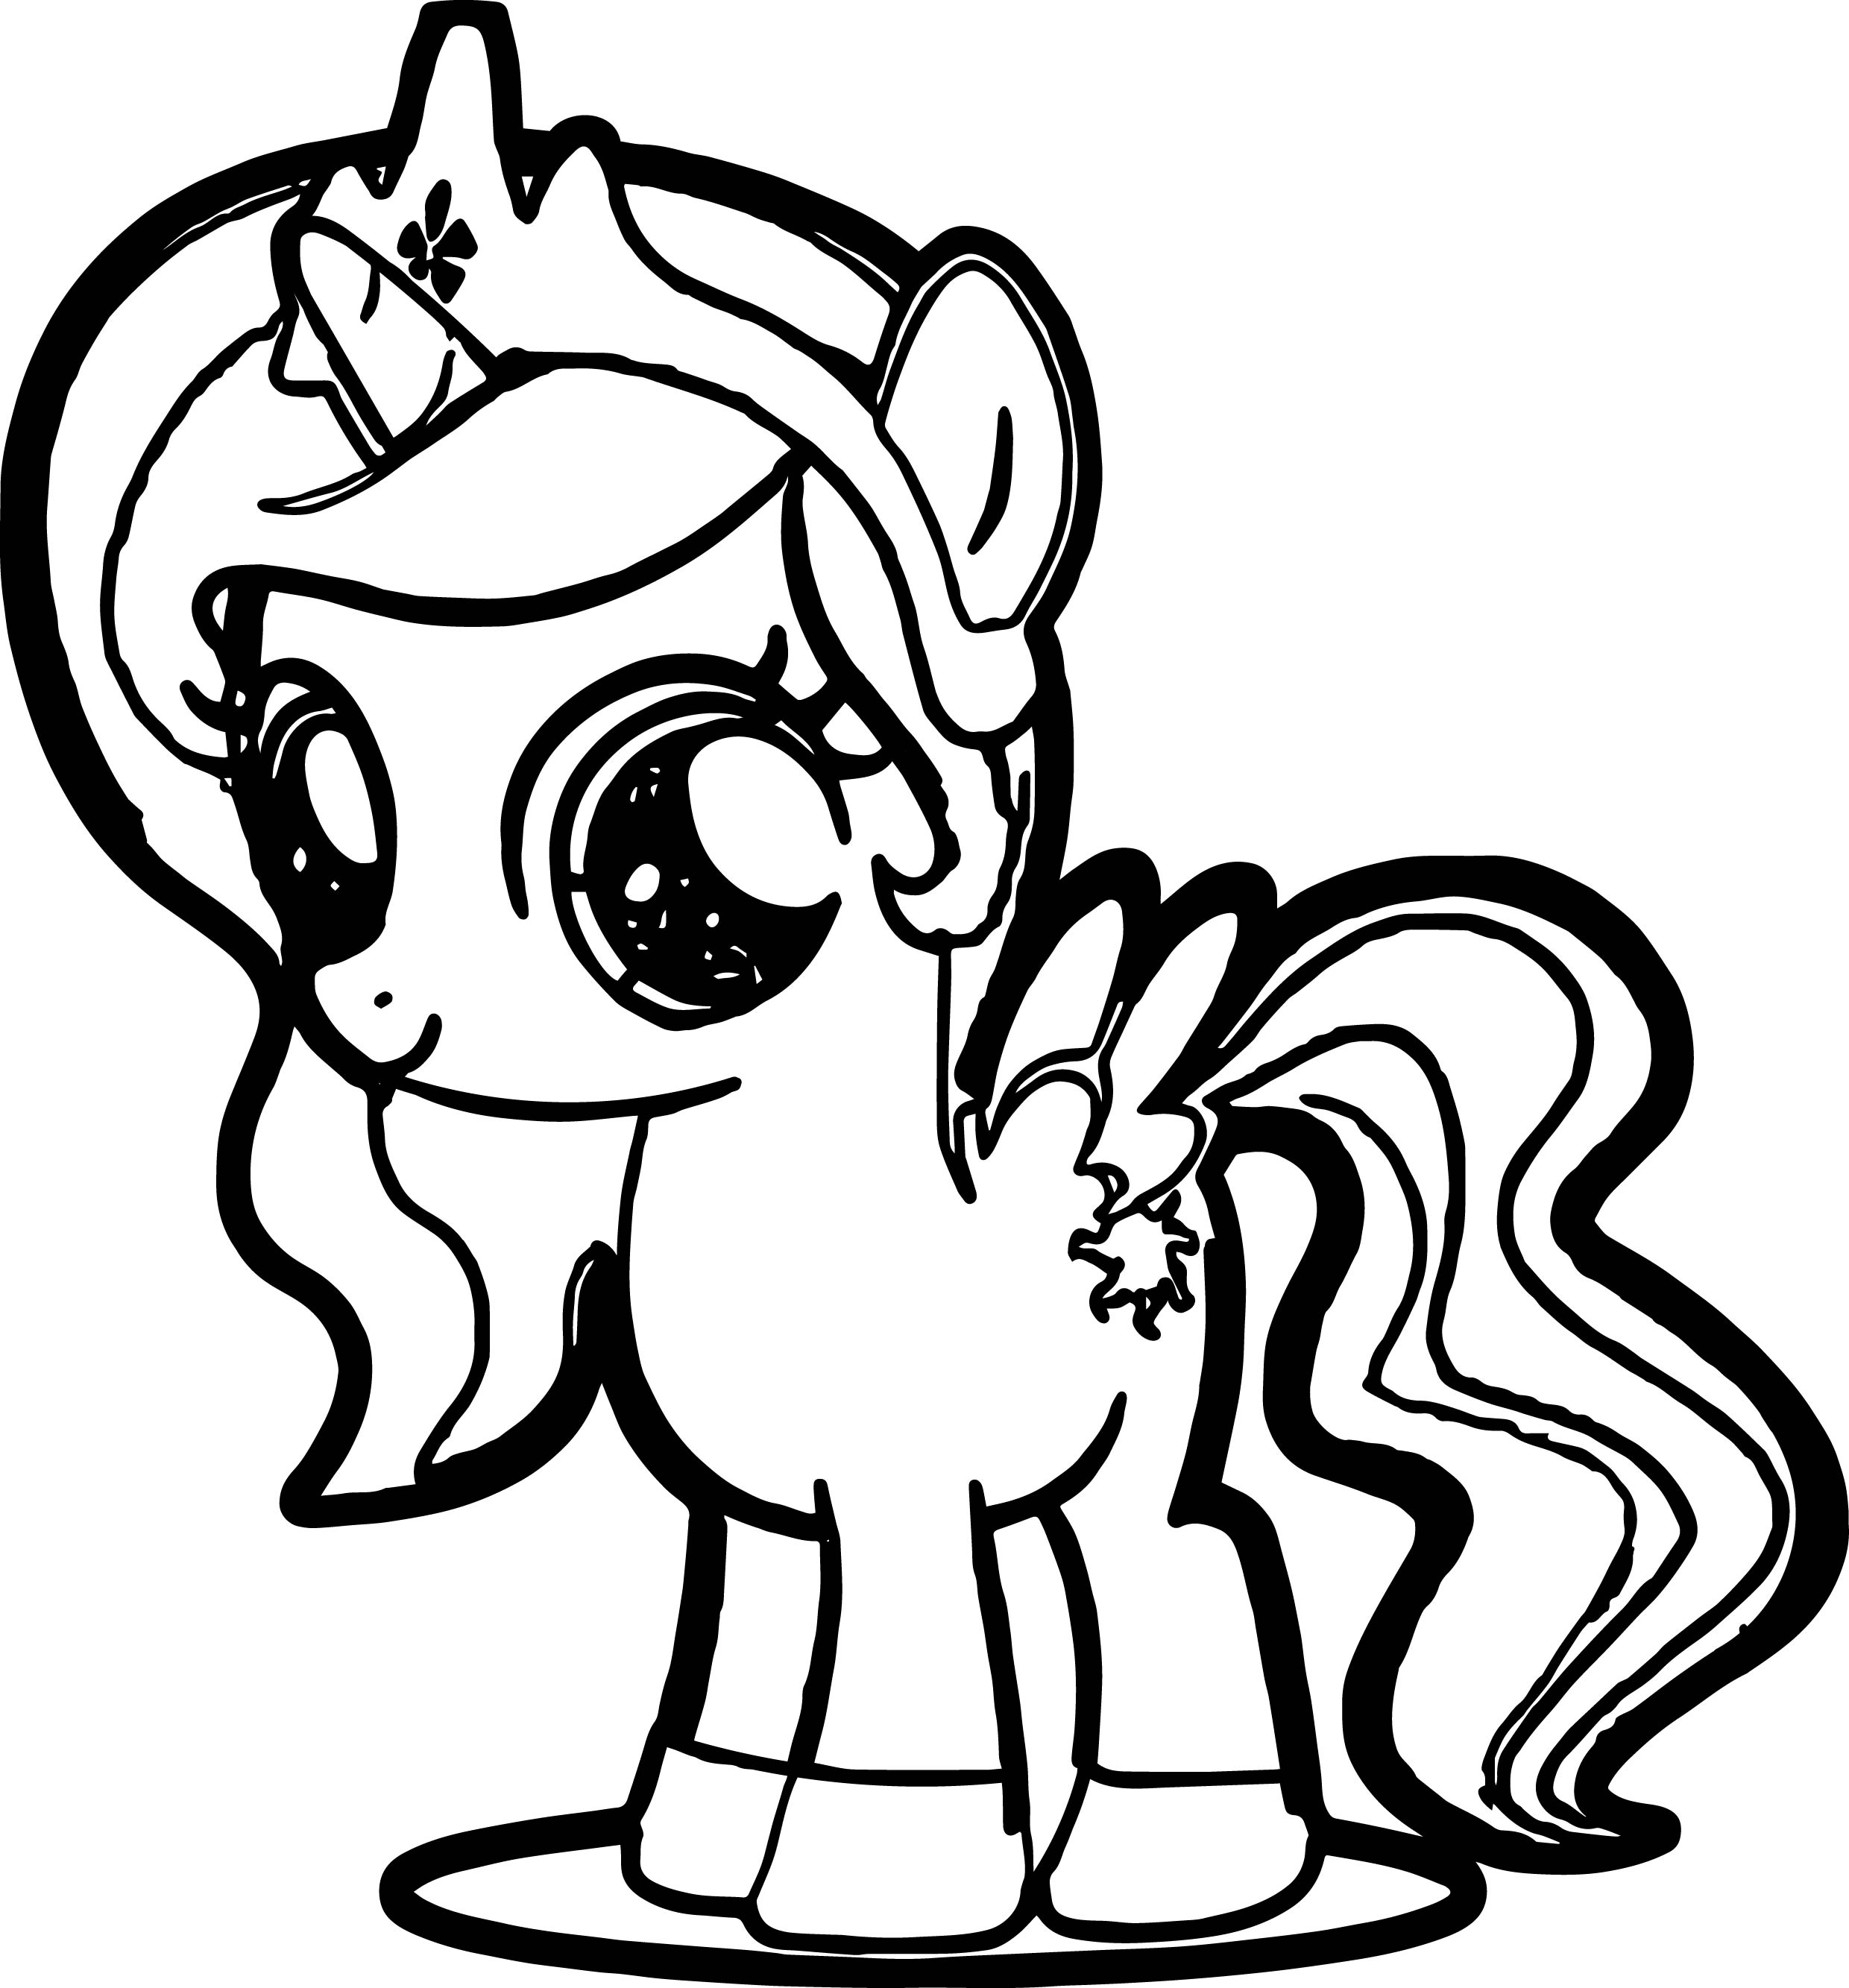 Cute My Little Pony Coloring Pages At GetColorings Free Printable 